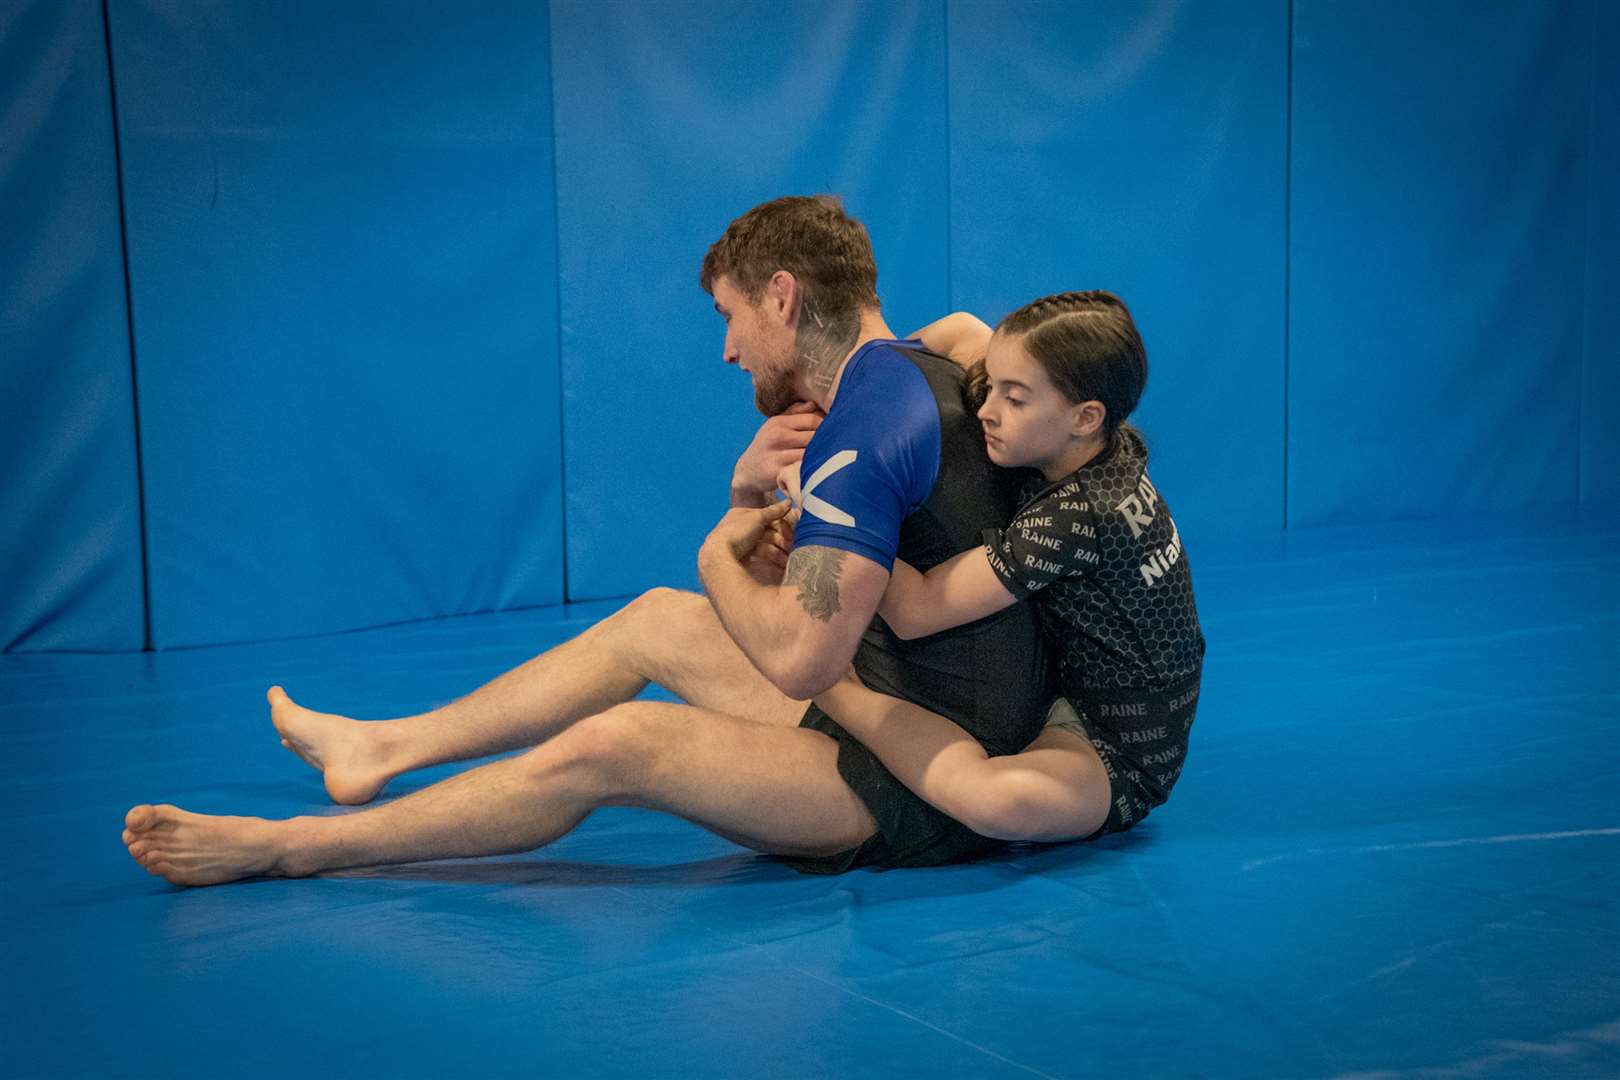 Niamh Ross mainly trains in Brazilian Jiu-Jitsu, but has recently added Muay Thai, freestyle and catch wrestling to her repertoire. Picture: Jessica Fulton